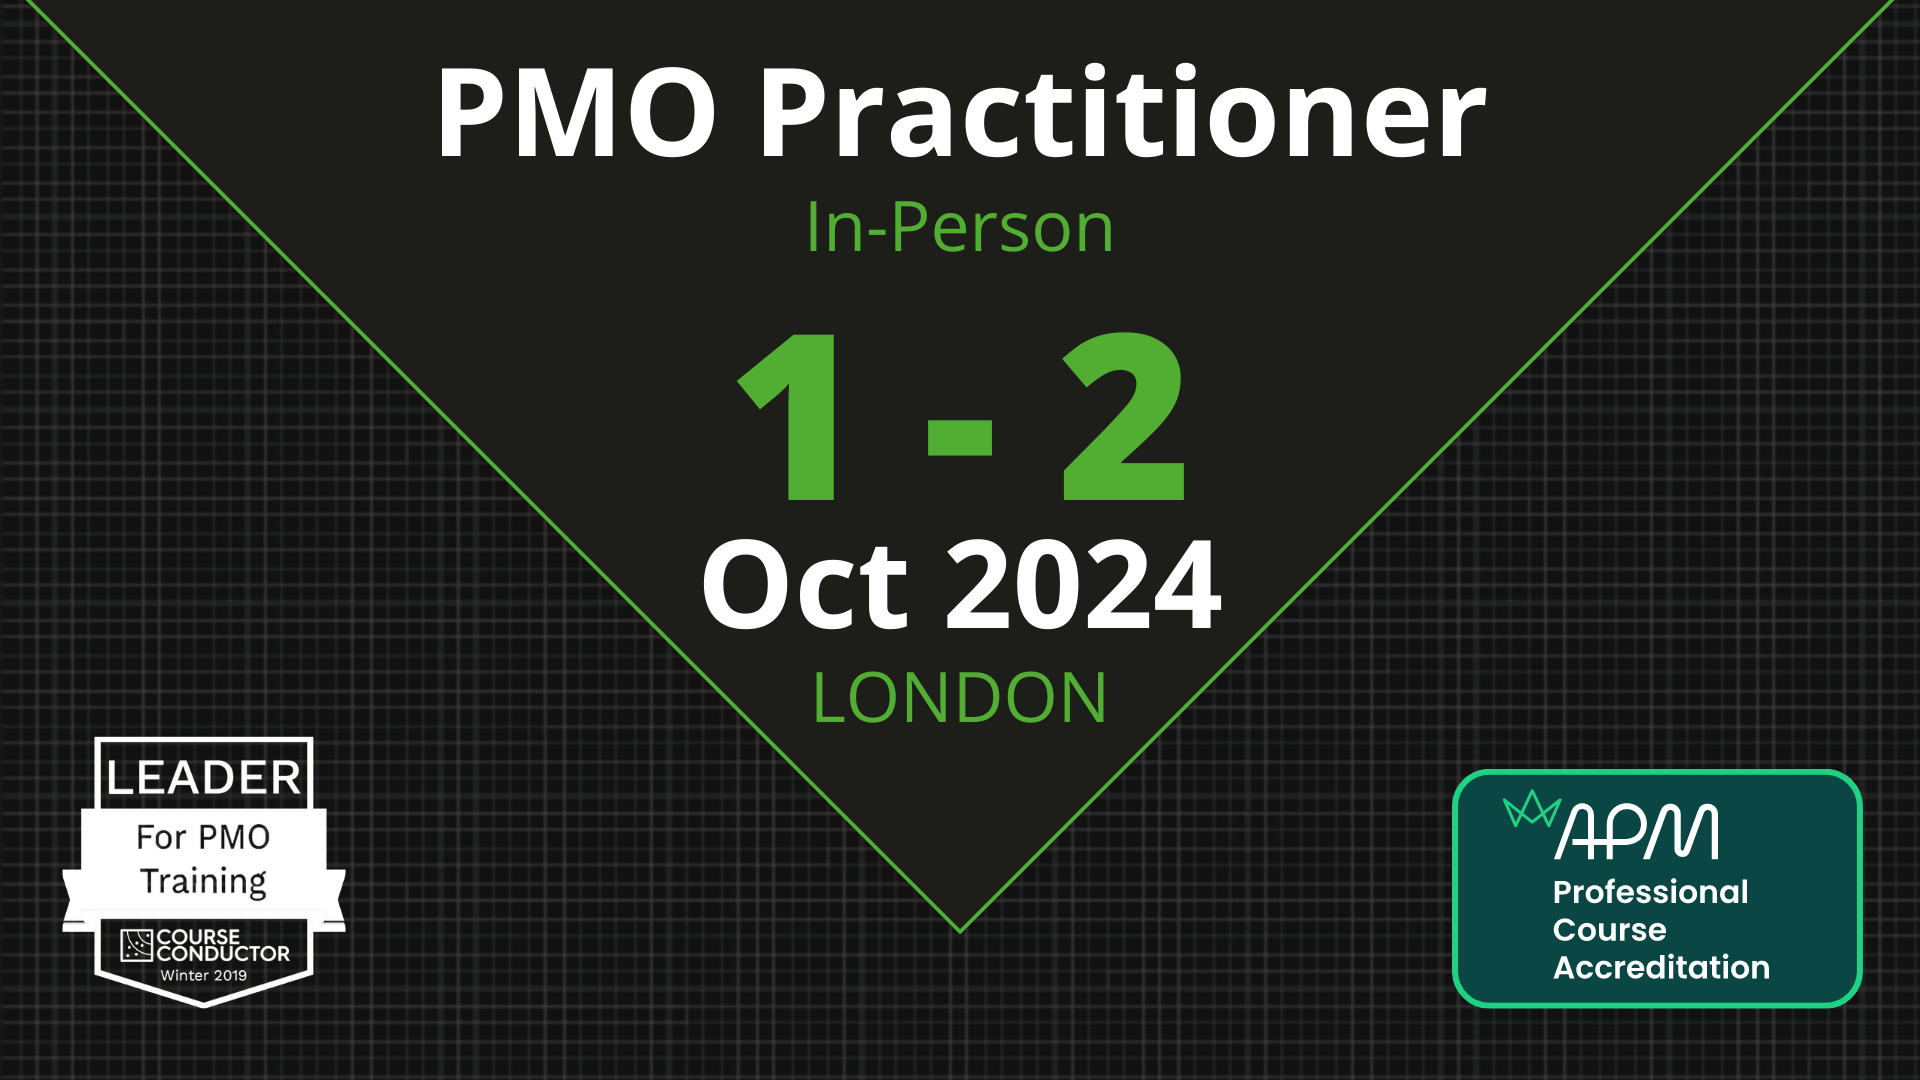 APM Accredited PMO Practitioner - October 2024